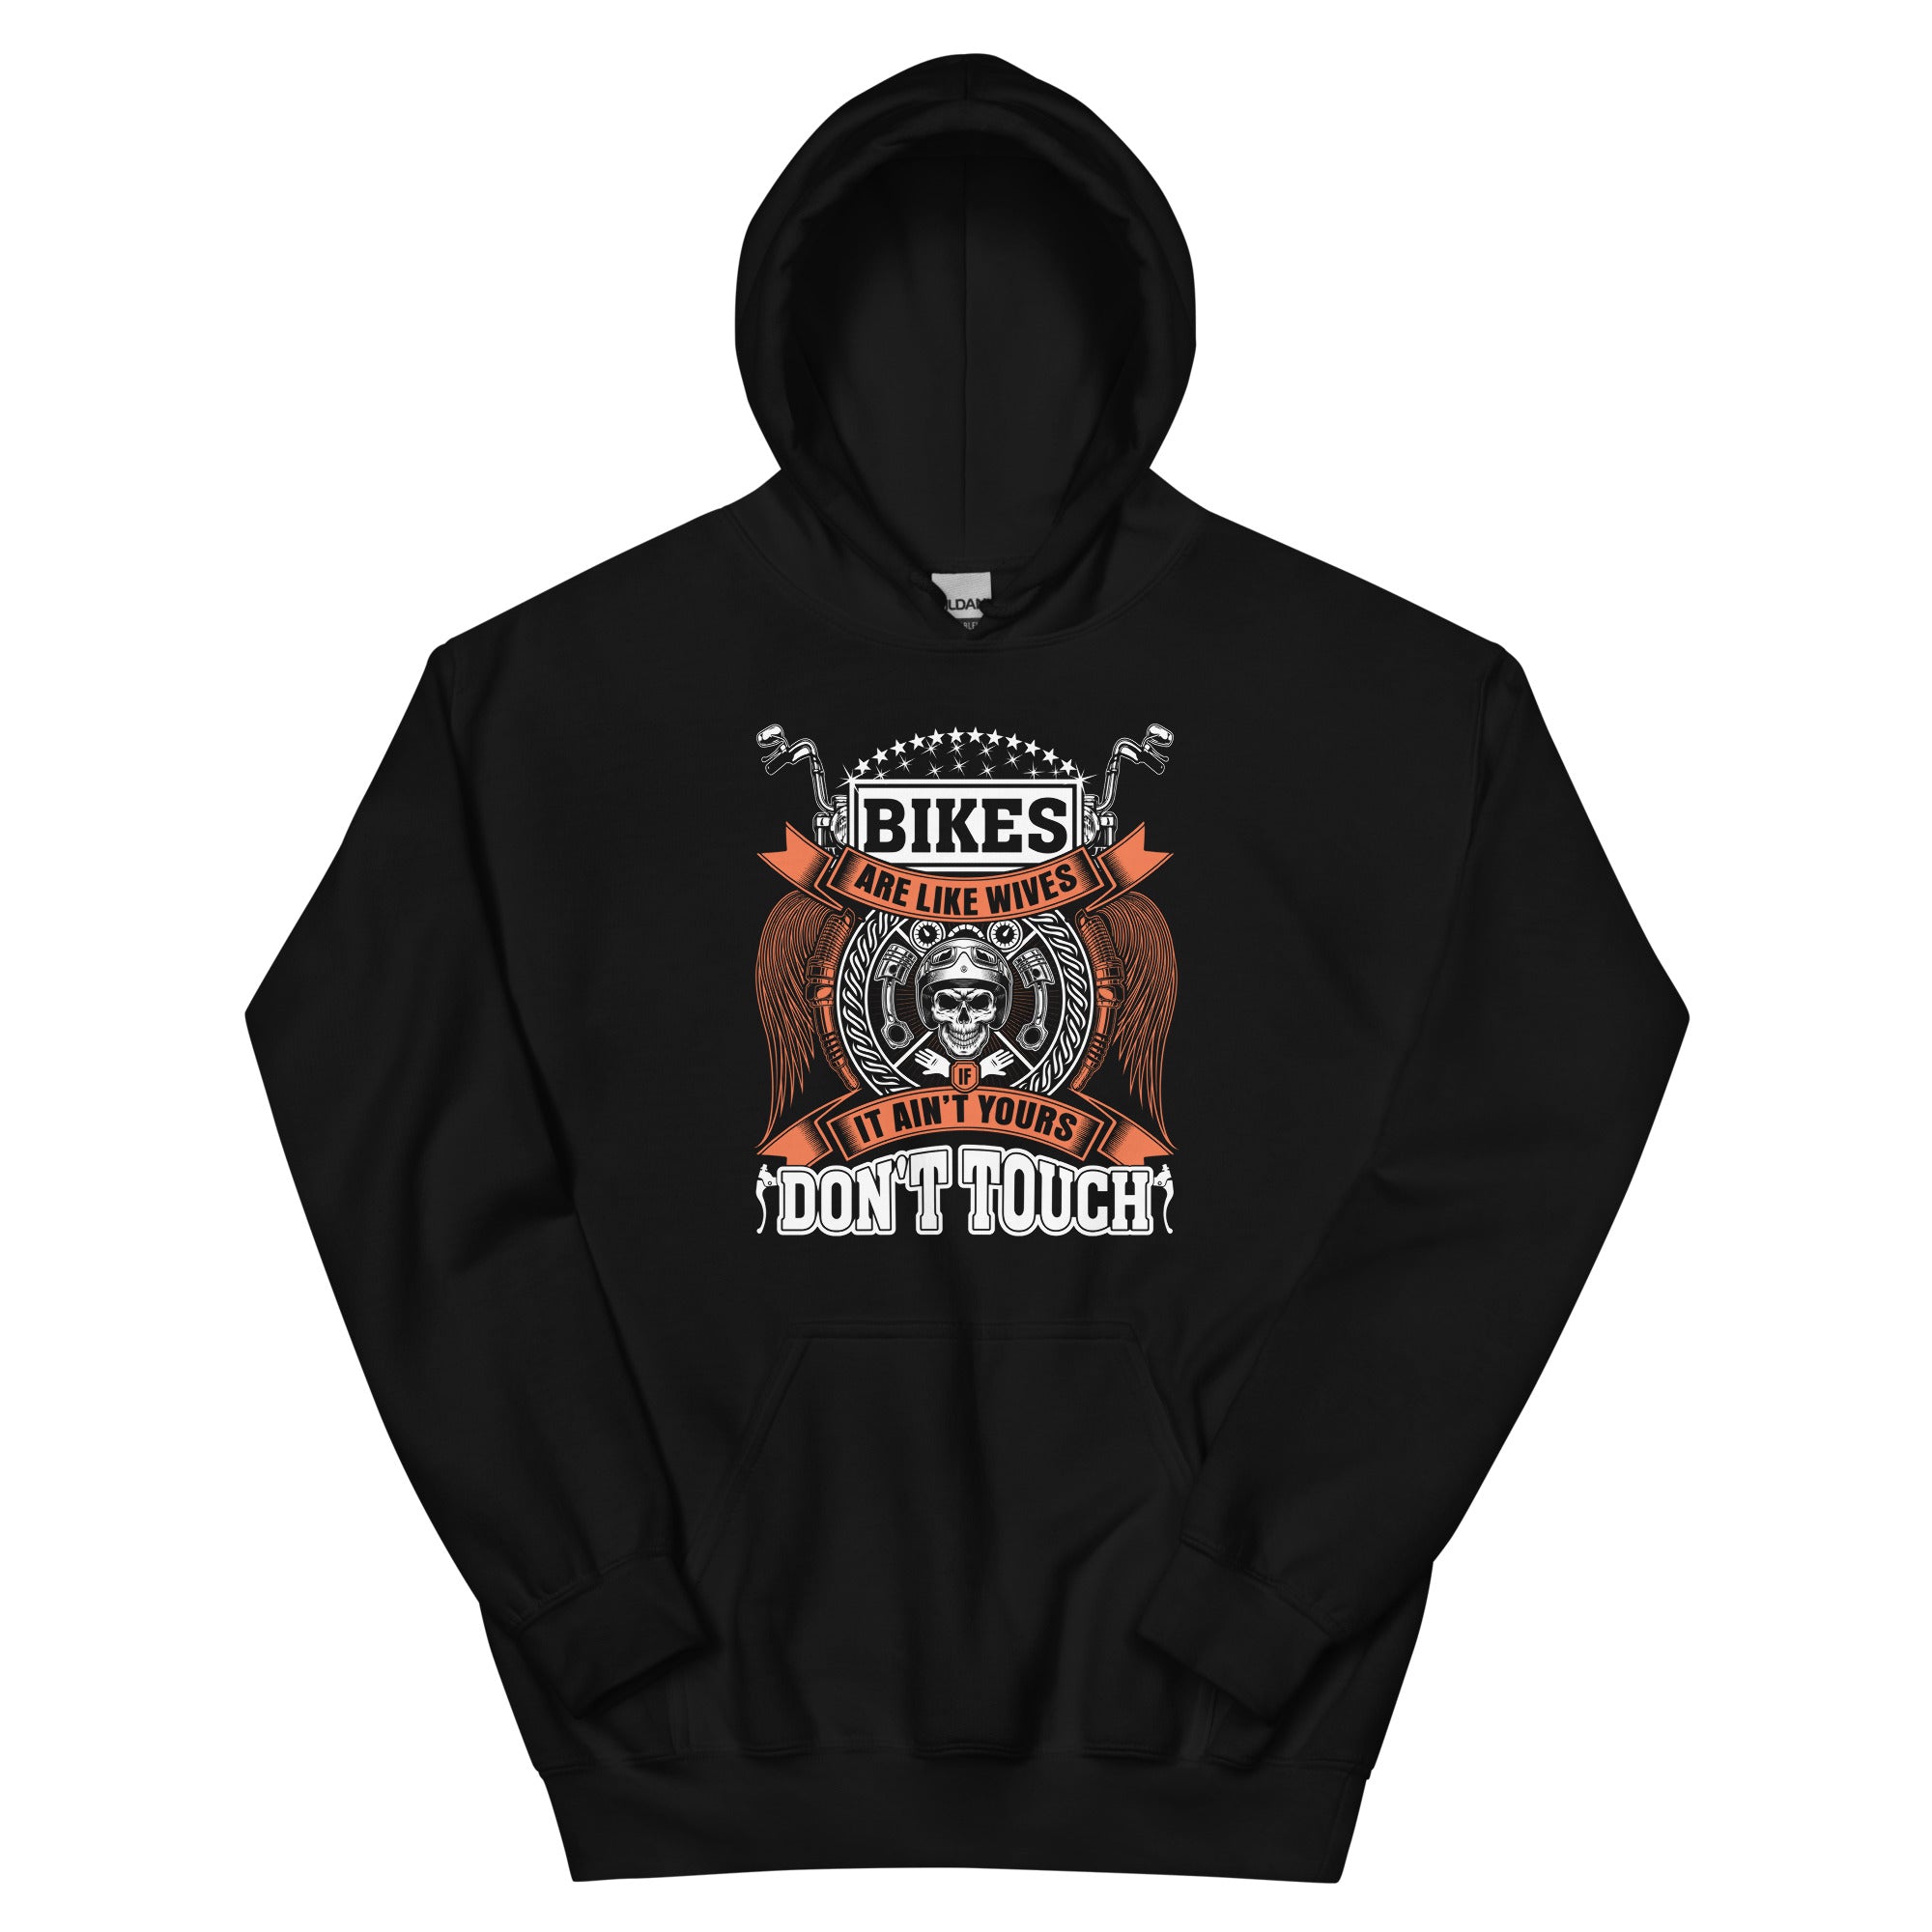 Bikes Are Like Wives, If It Ain't Yours, Don't Touch -  Unisex Hoodie